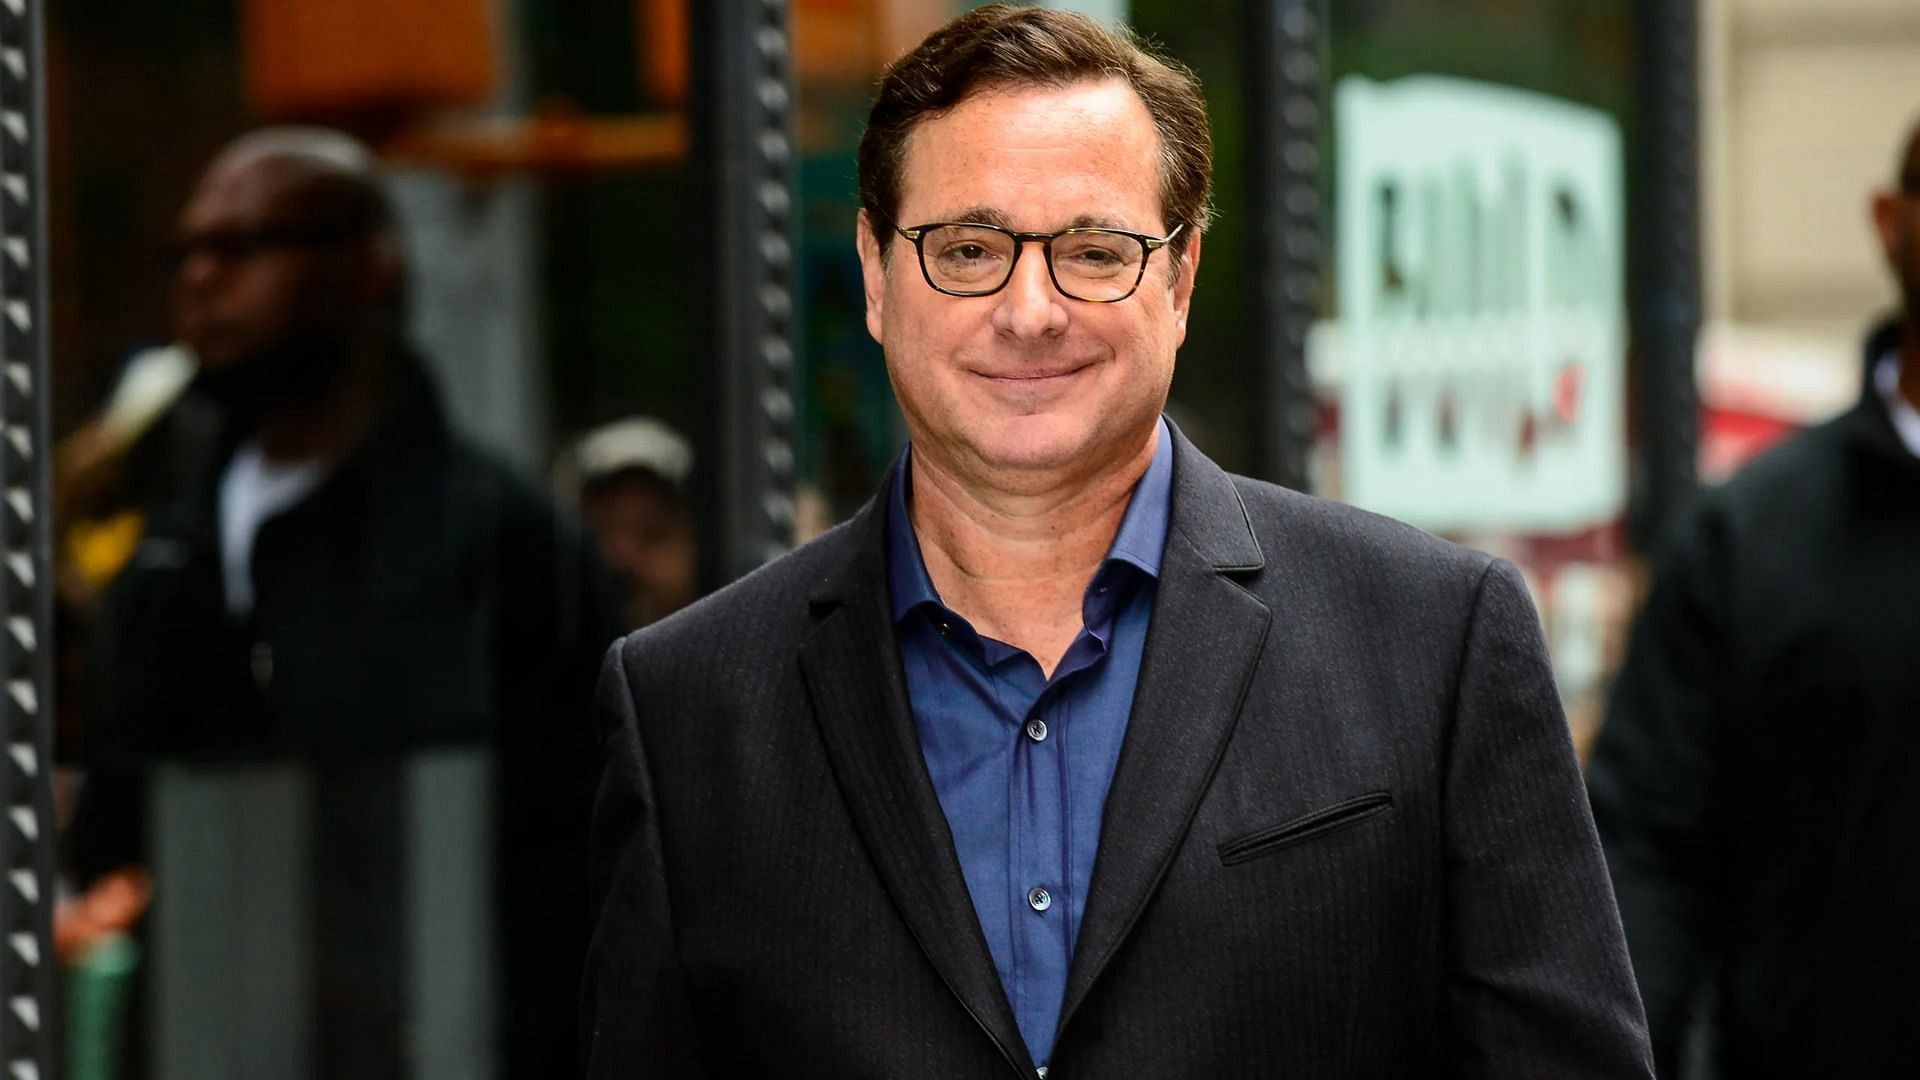 Bob Saget&#039;s body was found on January 9 after he suffered a traumatic head injury in his hotel room (Image via Getty Images/ Ray Tamarra)